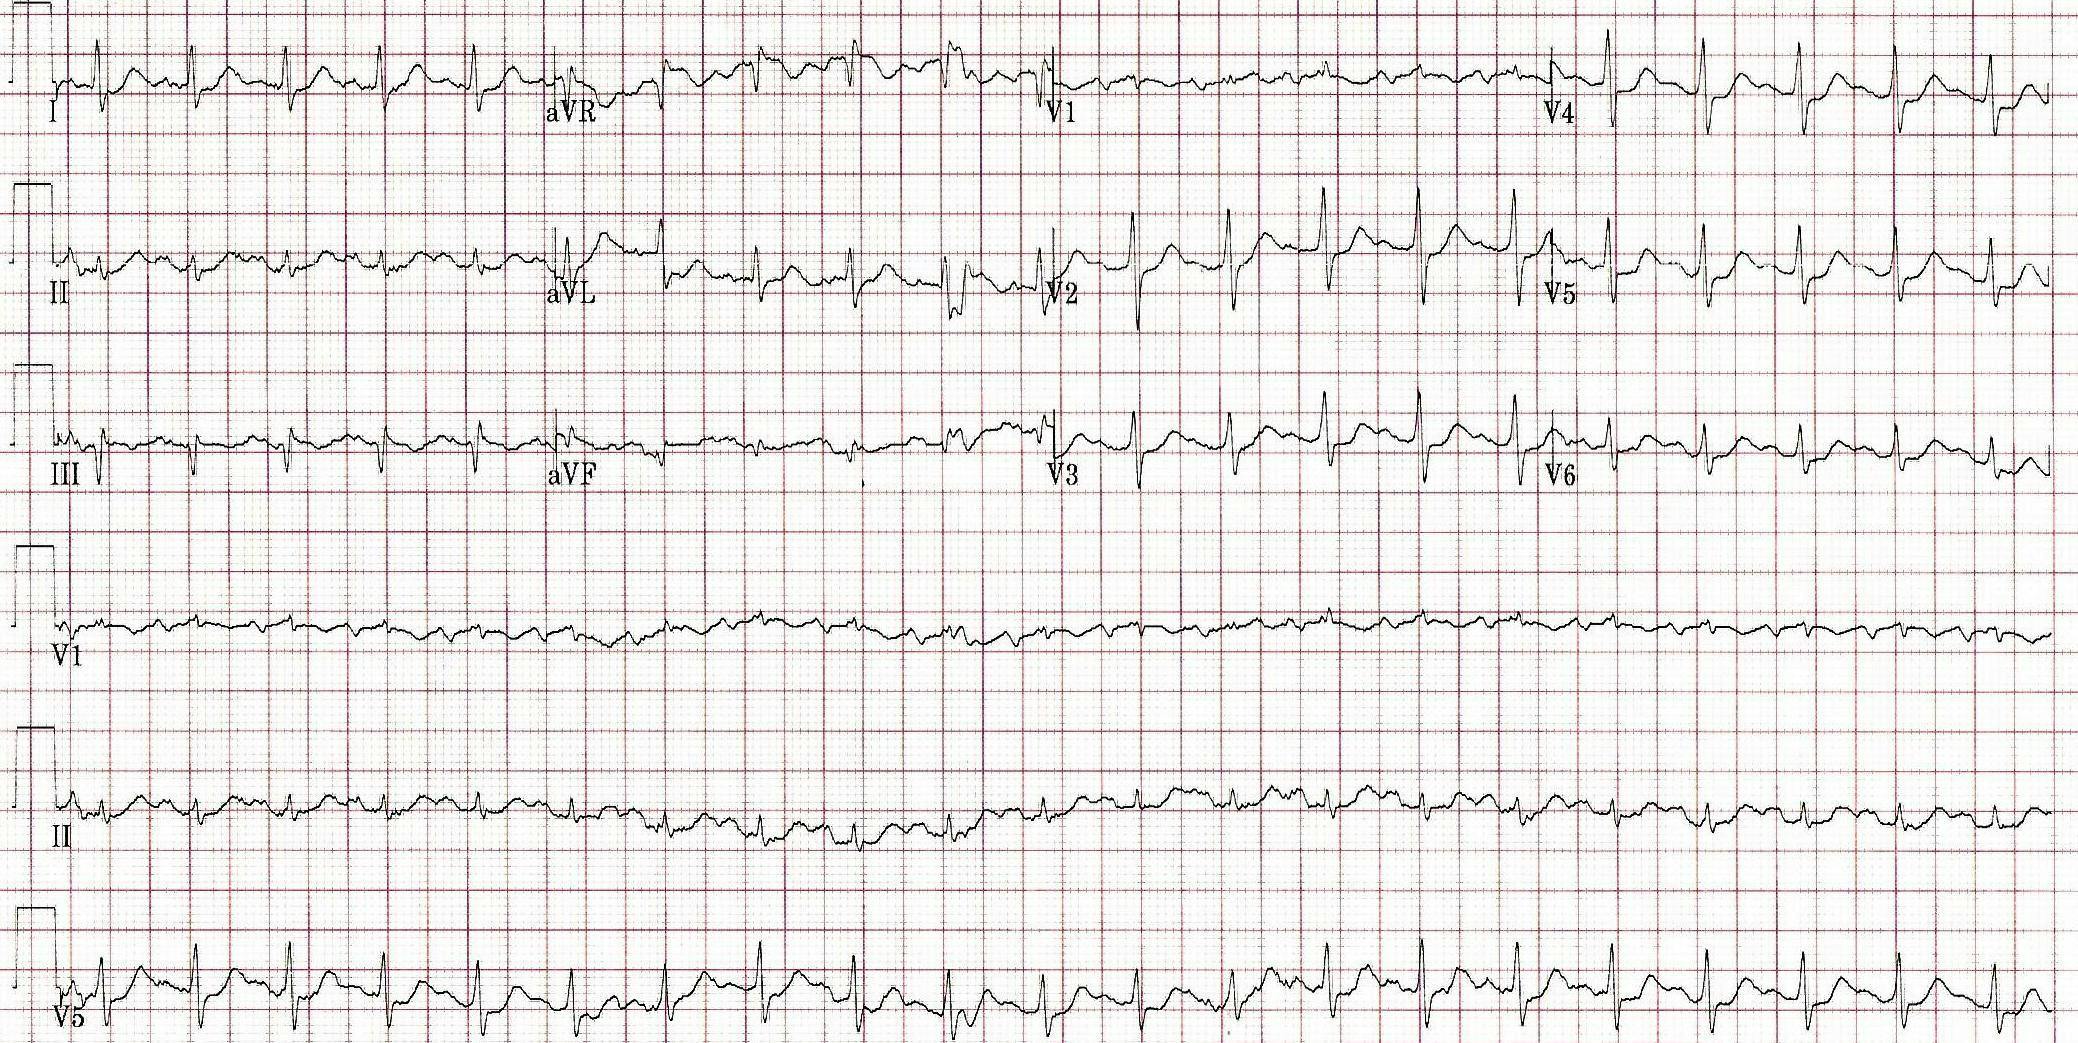 EKG of an ischemic patient experiencing alcohol withdrawal.